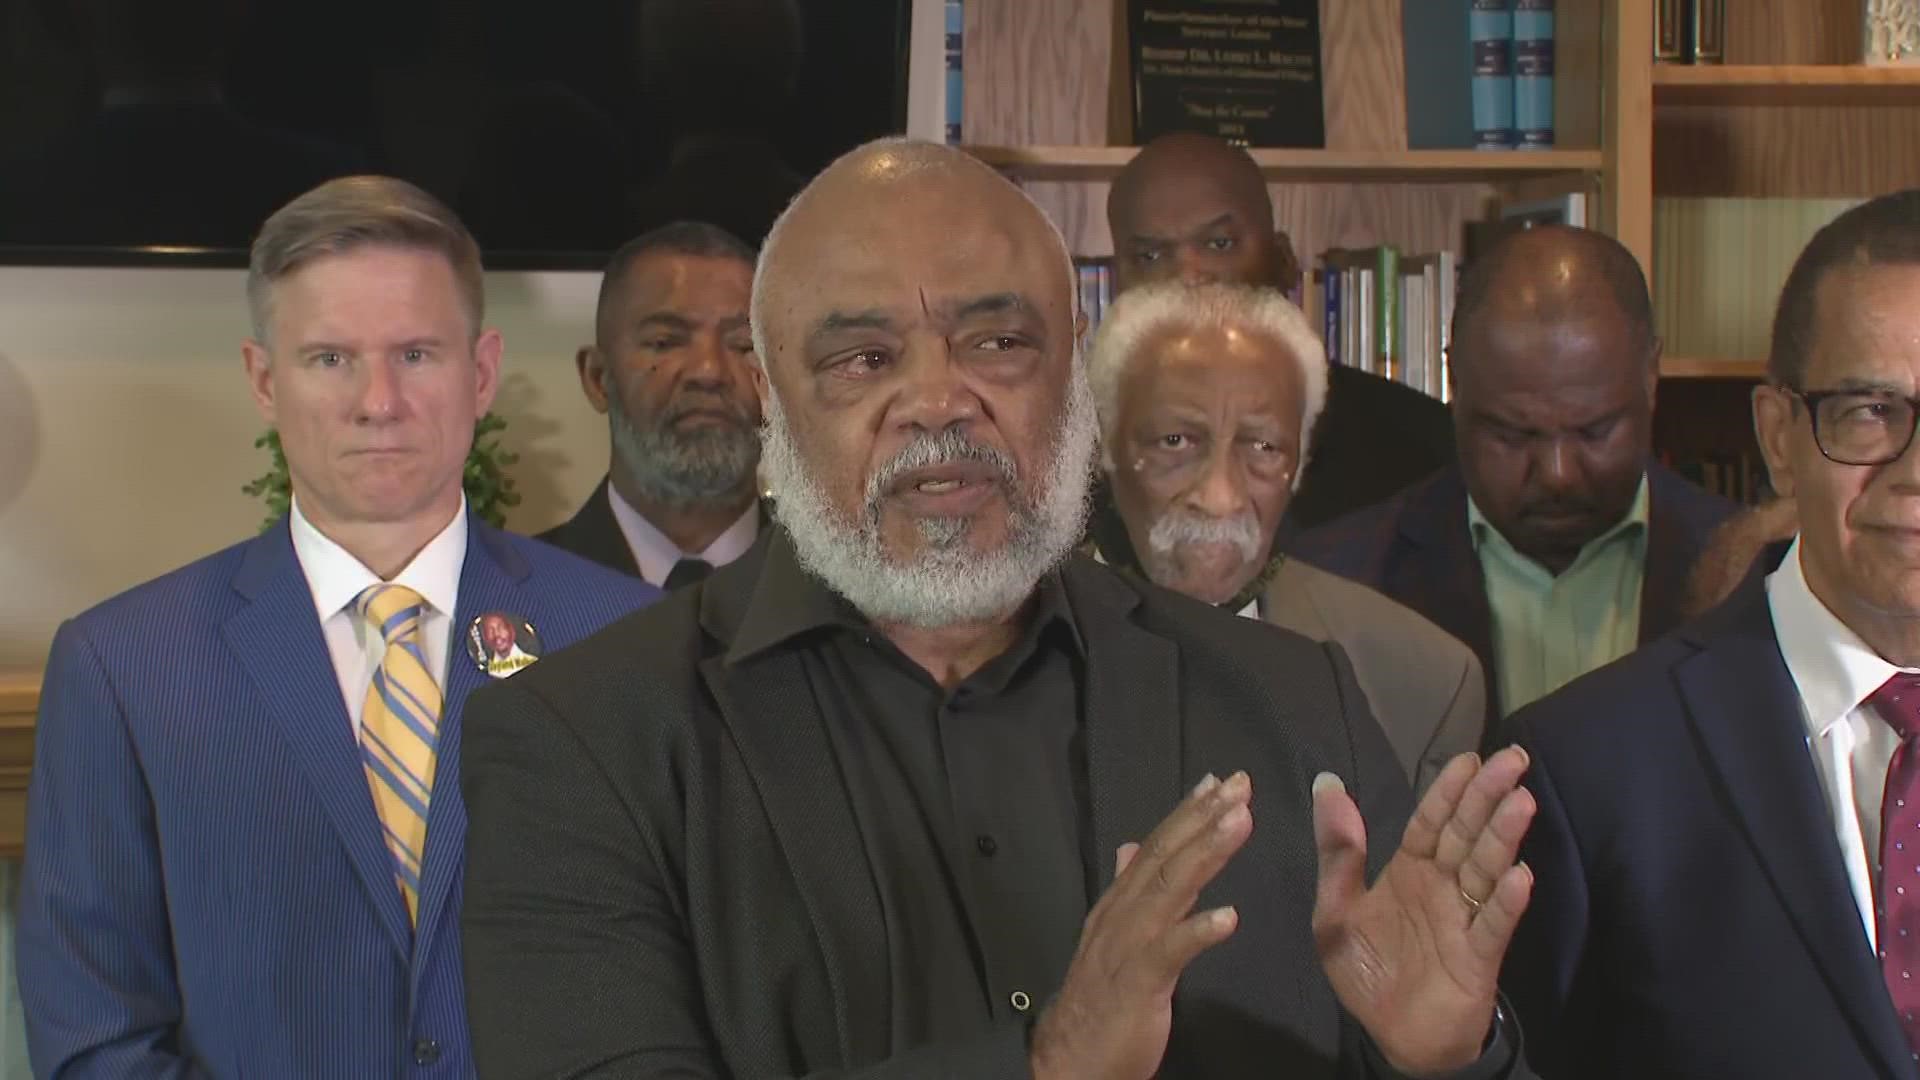 Religious leaders addressed the public calling for justice for the deadly police shooting of Jayland Walker